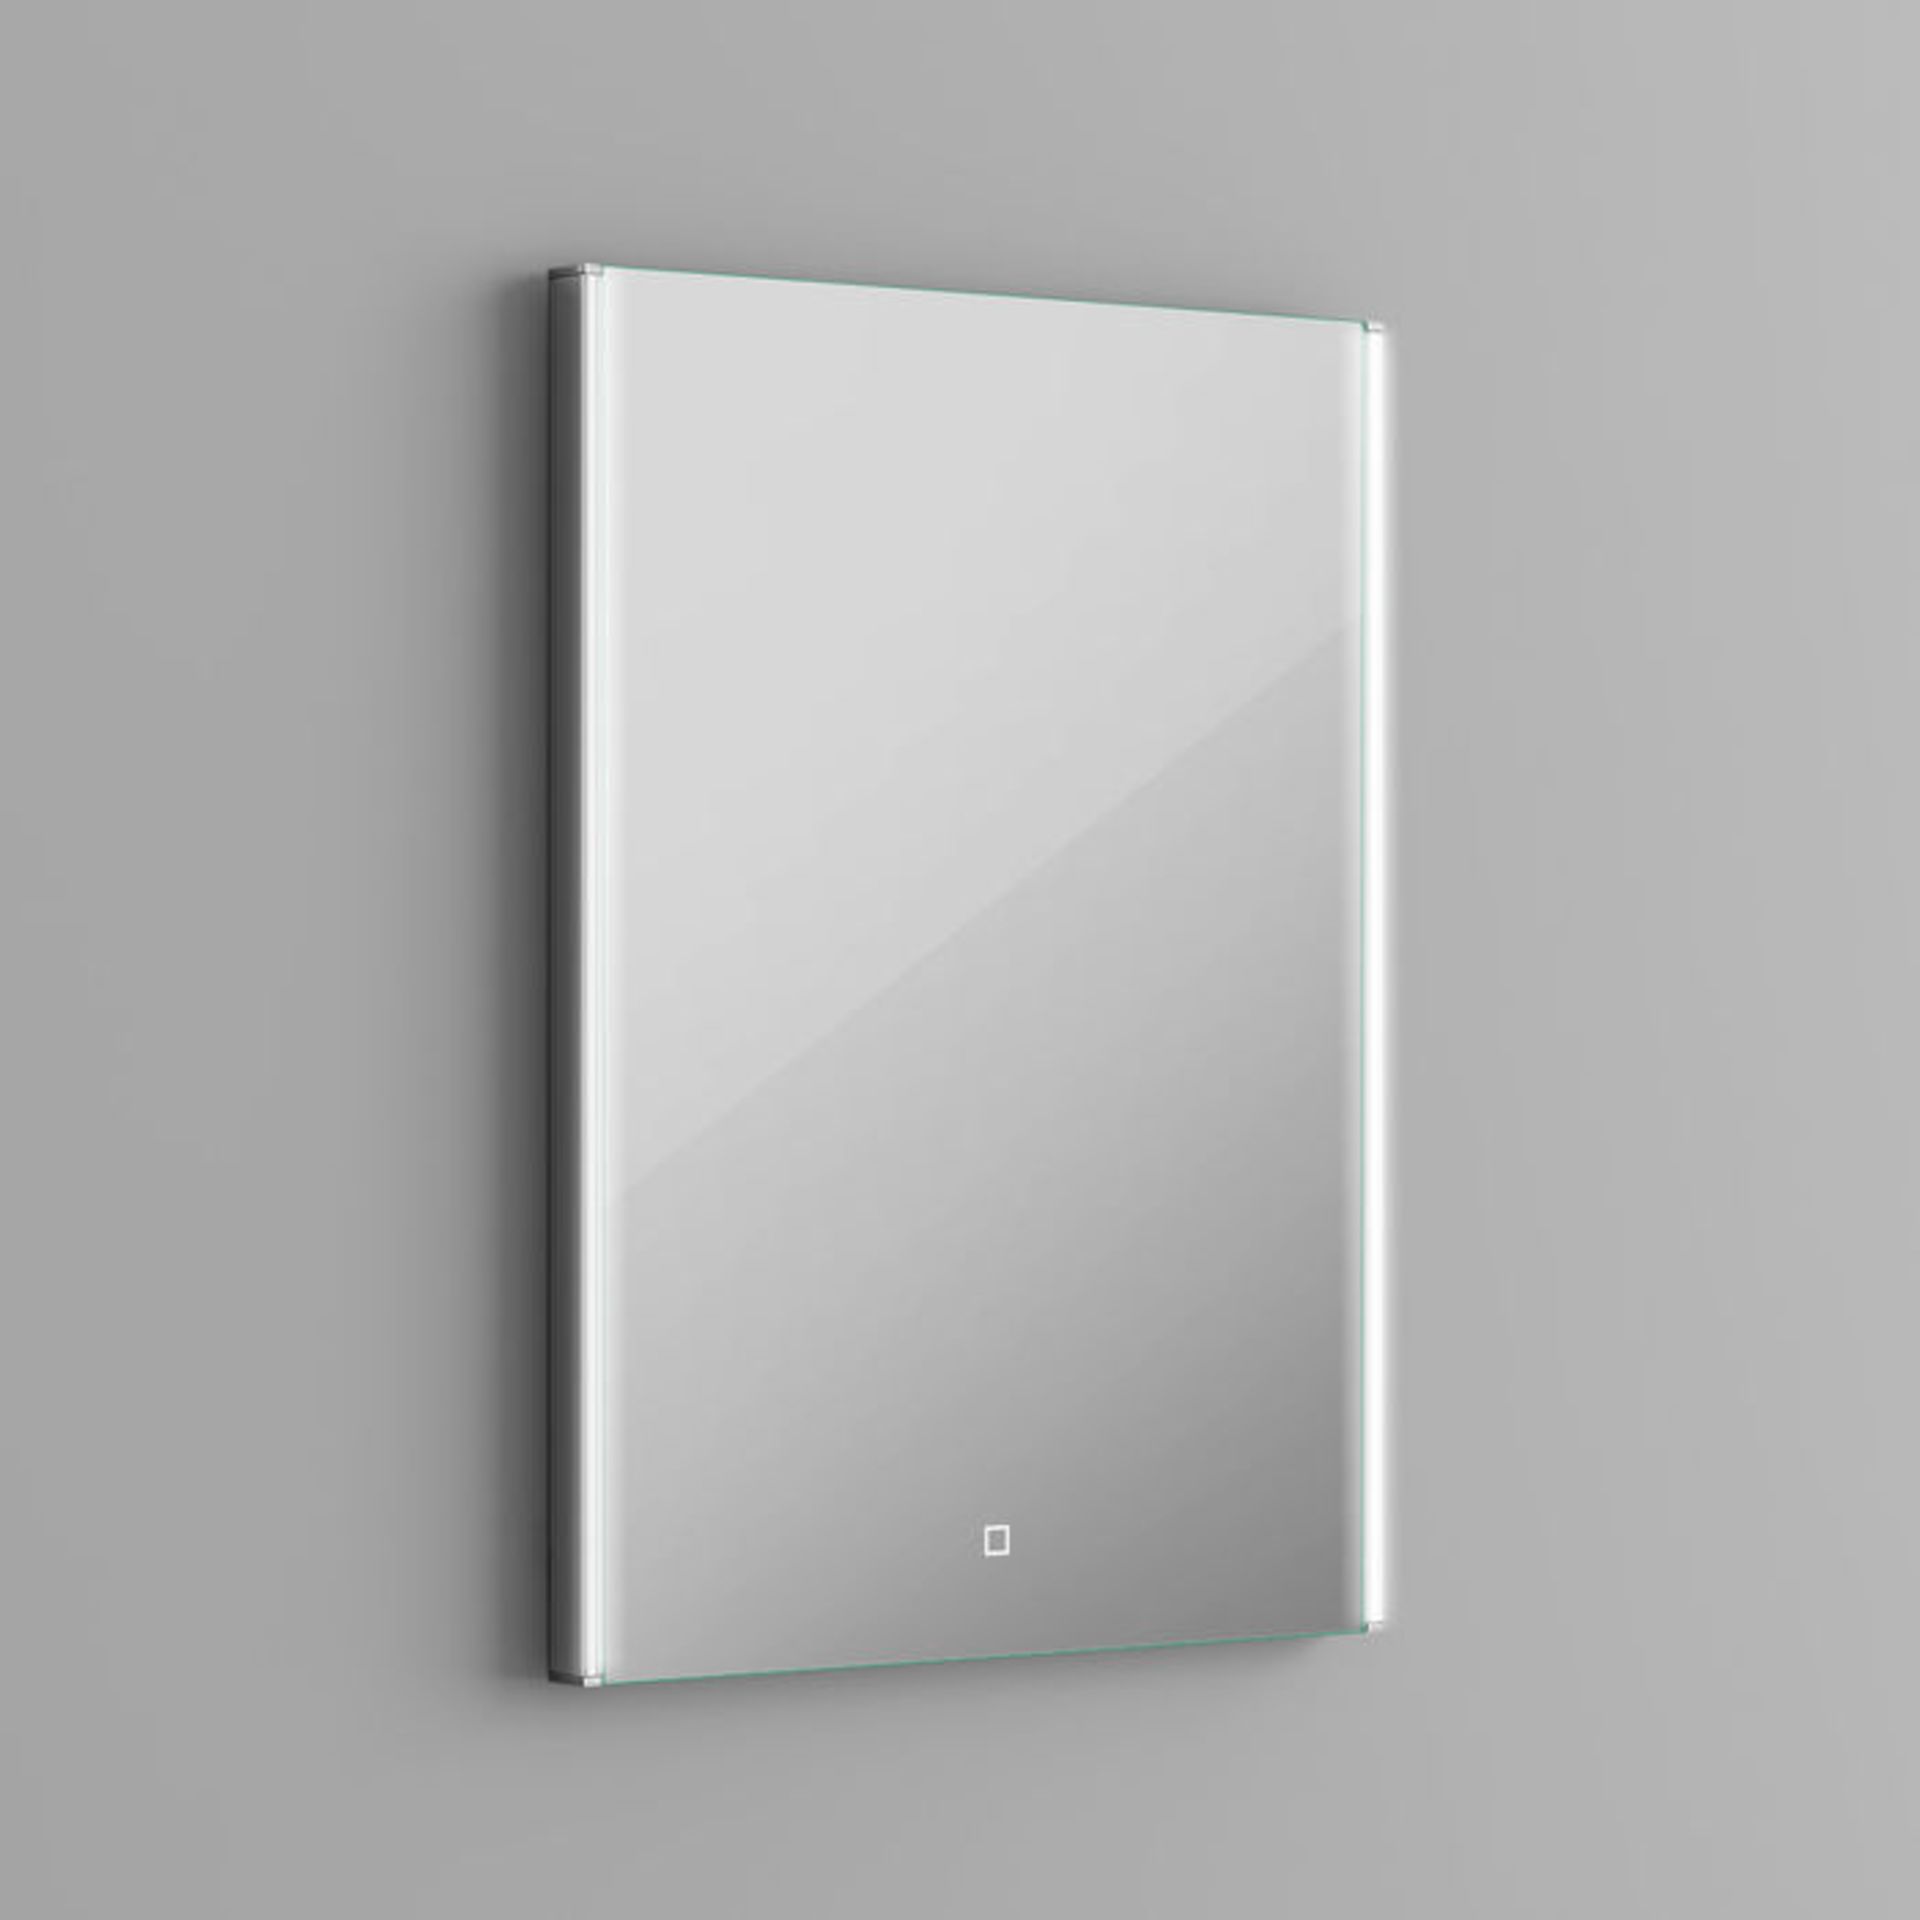 (Y205) 700x500mm Denver Illuminated LED Mirror - Switch Control. RRP £349.99. Energy efficient LED - Image 5 of 5